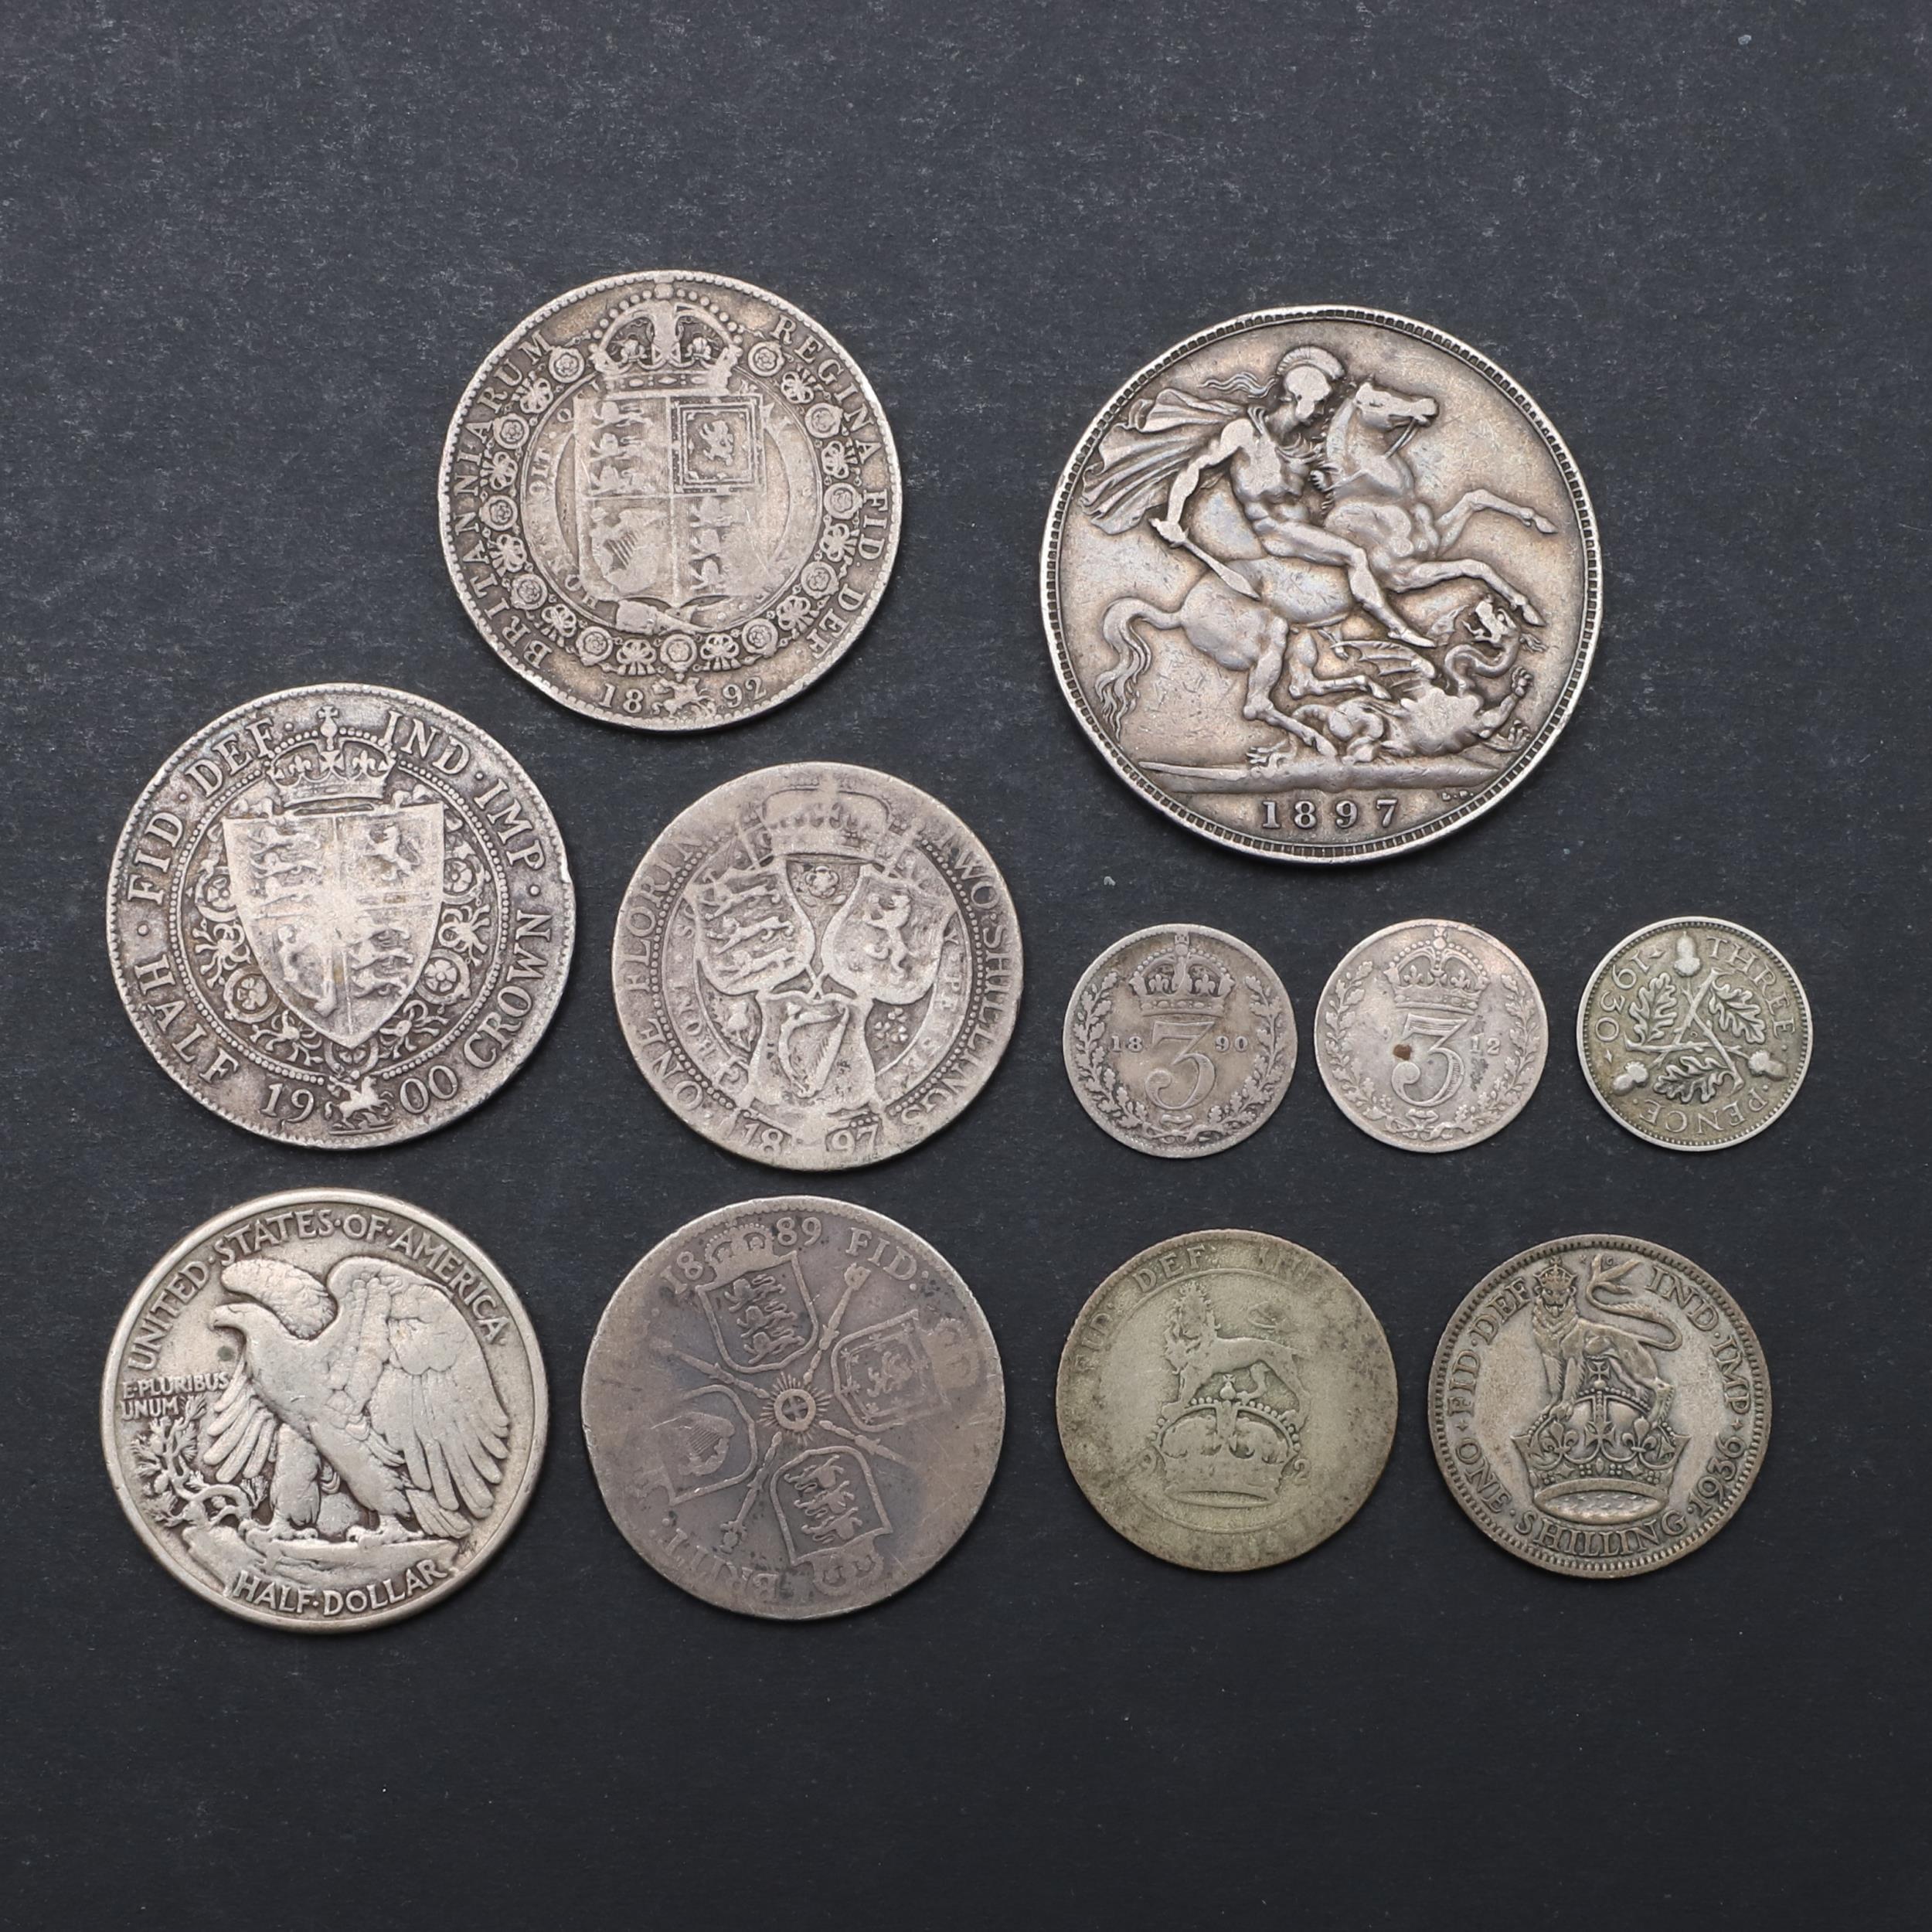 A QUEEN VICTORIA CROWN, 1897 AND A SMALL COLLECTION OF OTHER SILVER. - Image 2 of 3